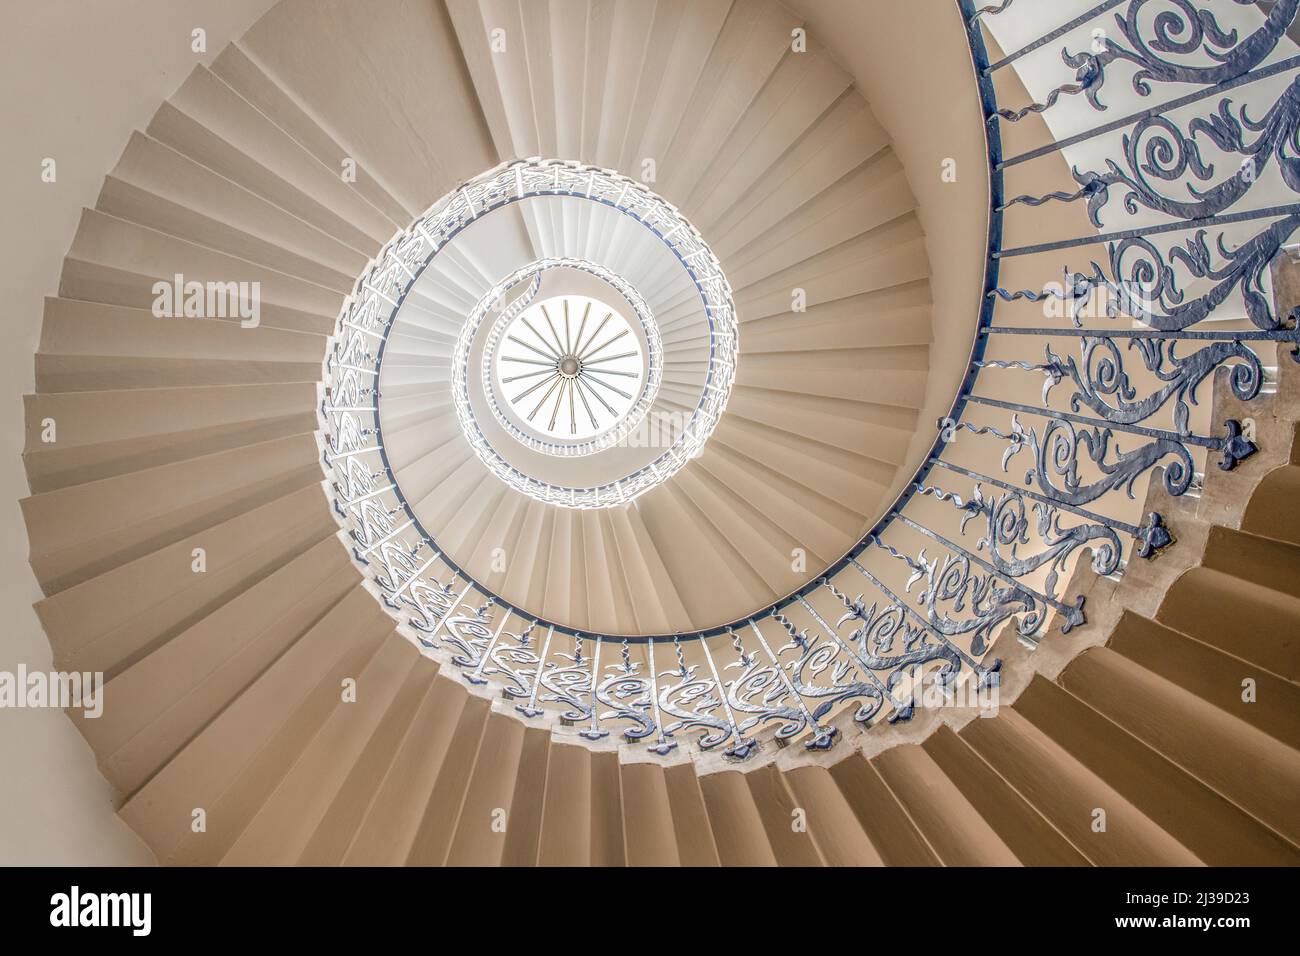 The famous spiral staircase in the Queen's House, Greenwich, London Borough of Greenwich, Greater London, England, United Kingdom Stock Photo